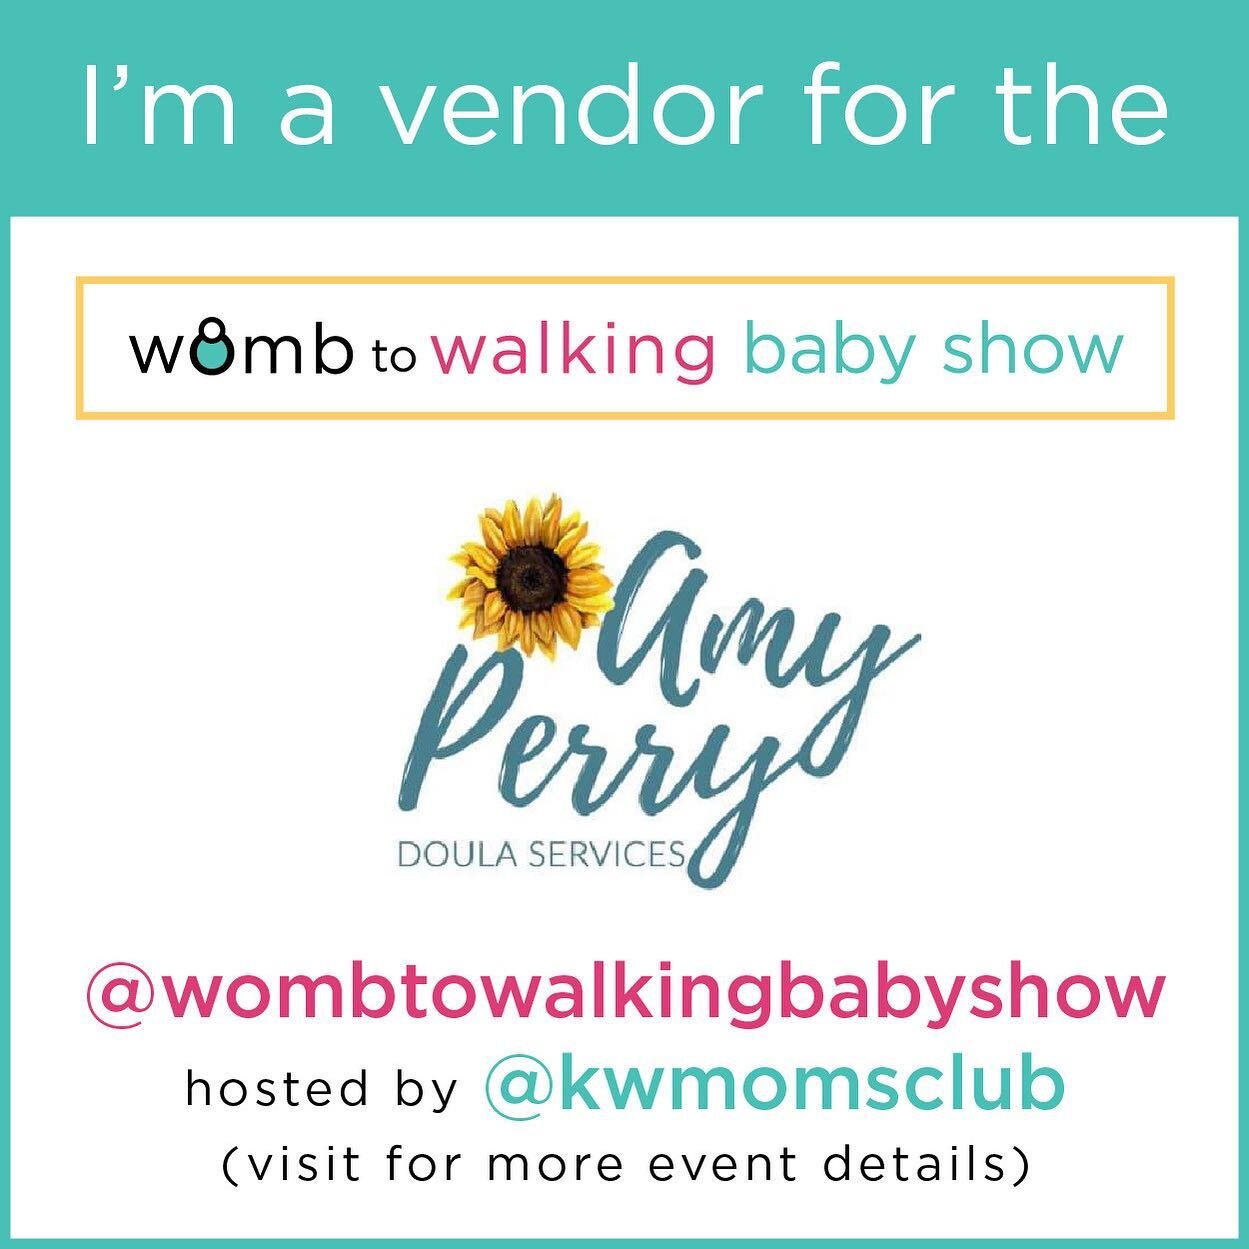 Come on out to the @wombtowalkingbabyshow this SUNDAY APRIL 23 from 10am-2pm to meet amazing individuals and businesses, shop, connect, and learn! I&rsquo;ll be there, along with other amazing doulas if you&rsquo;re looking to speak to some. Tickets 